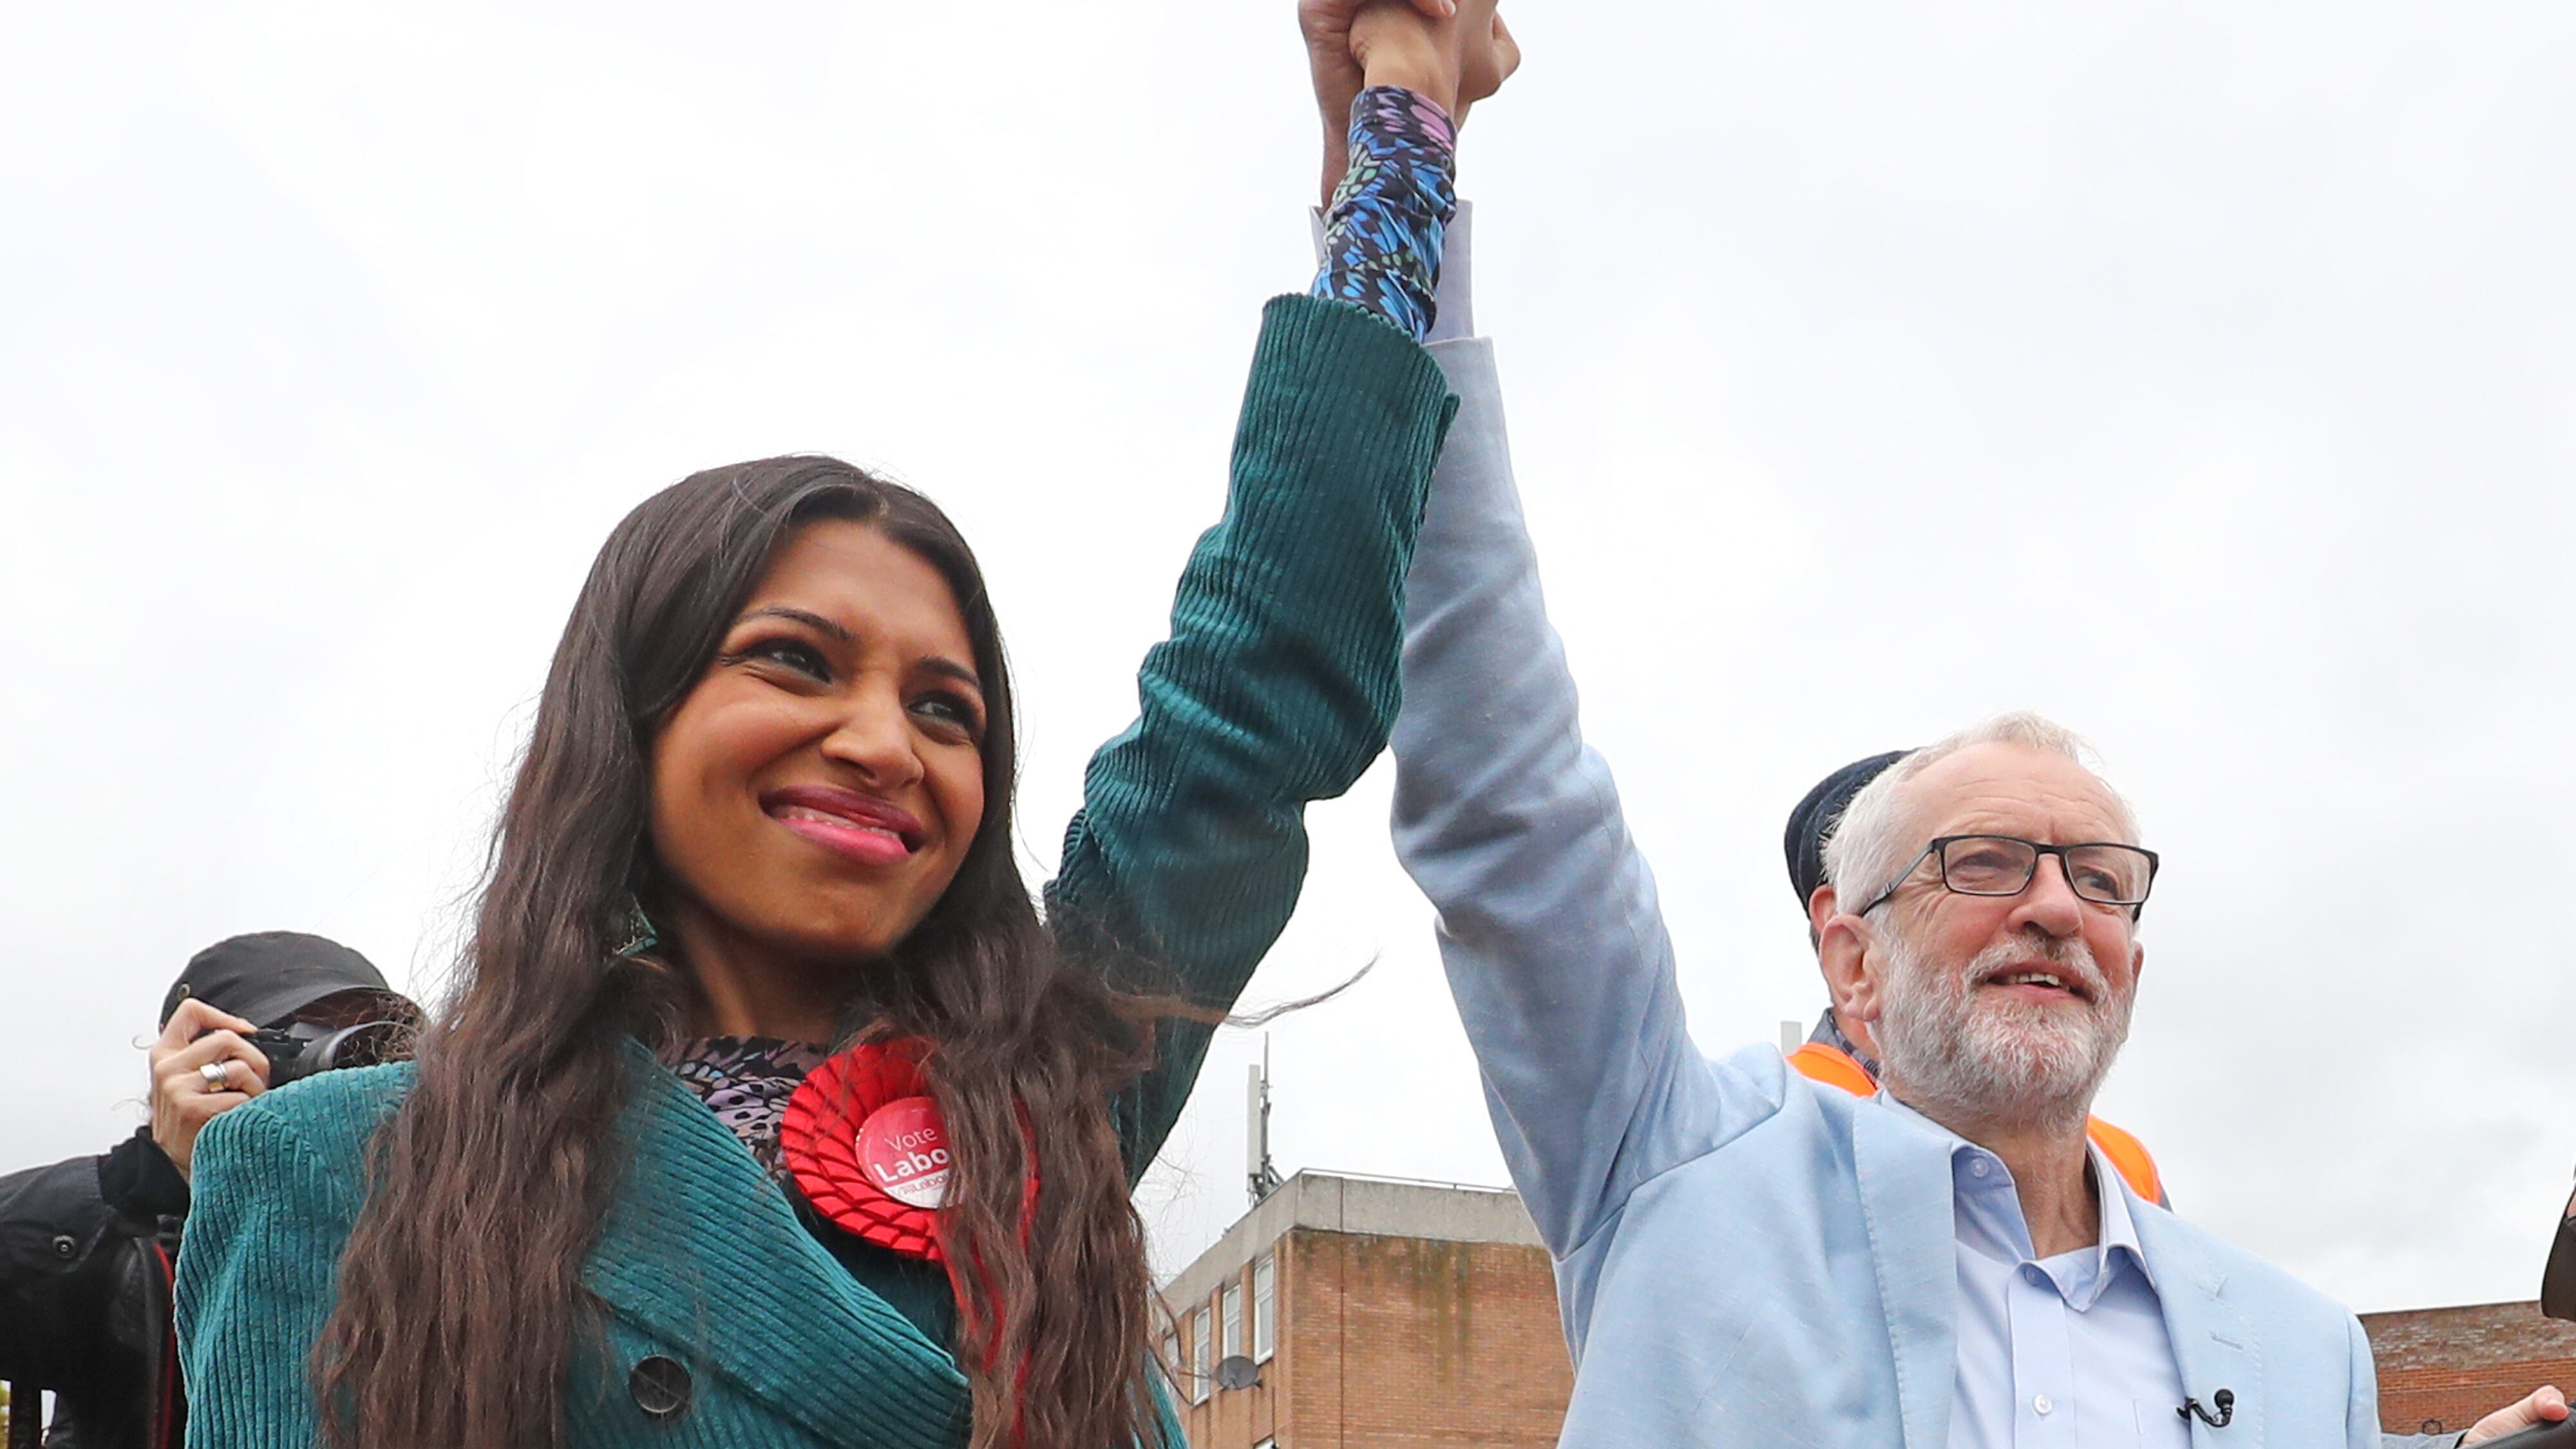 Faiza Shaheen has confirmed she has resigned from the Labour Party after she was dropped as a candidate for the upcoming General Election